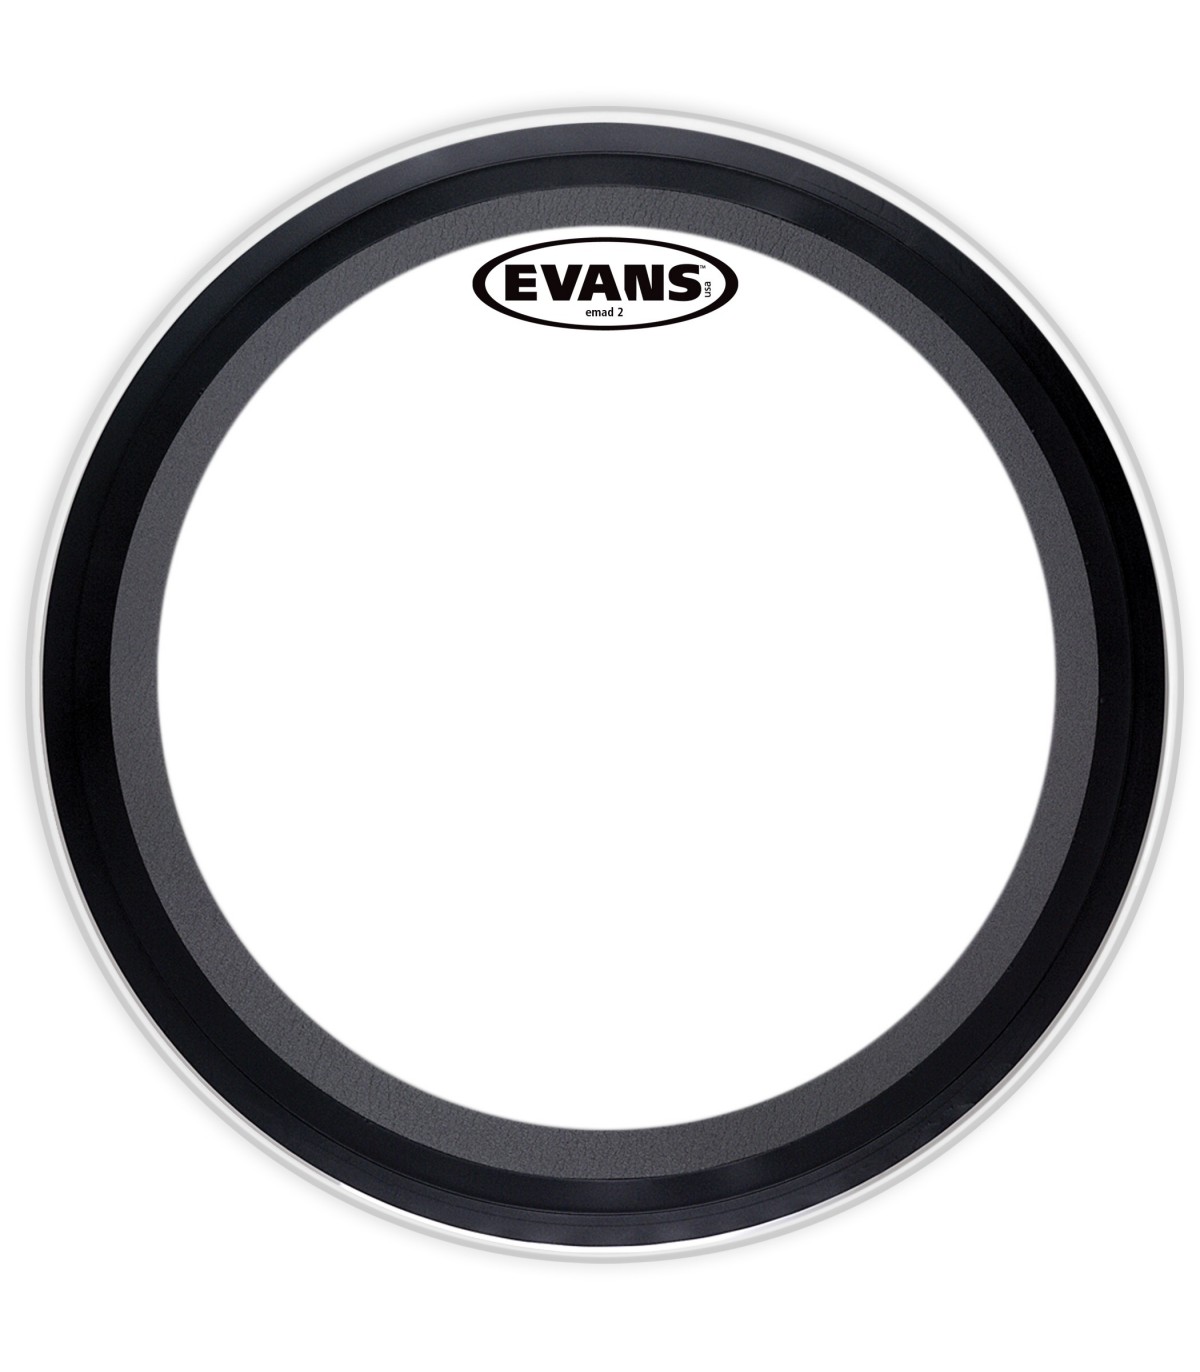 evans emad2 clear bass drum head